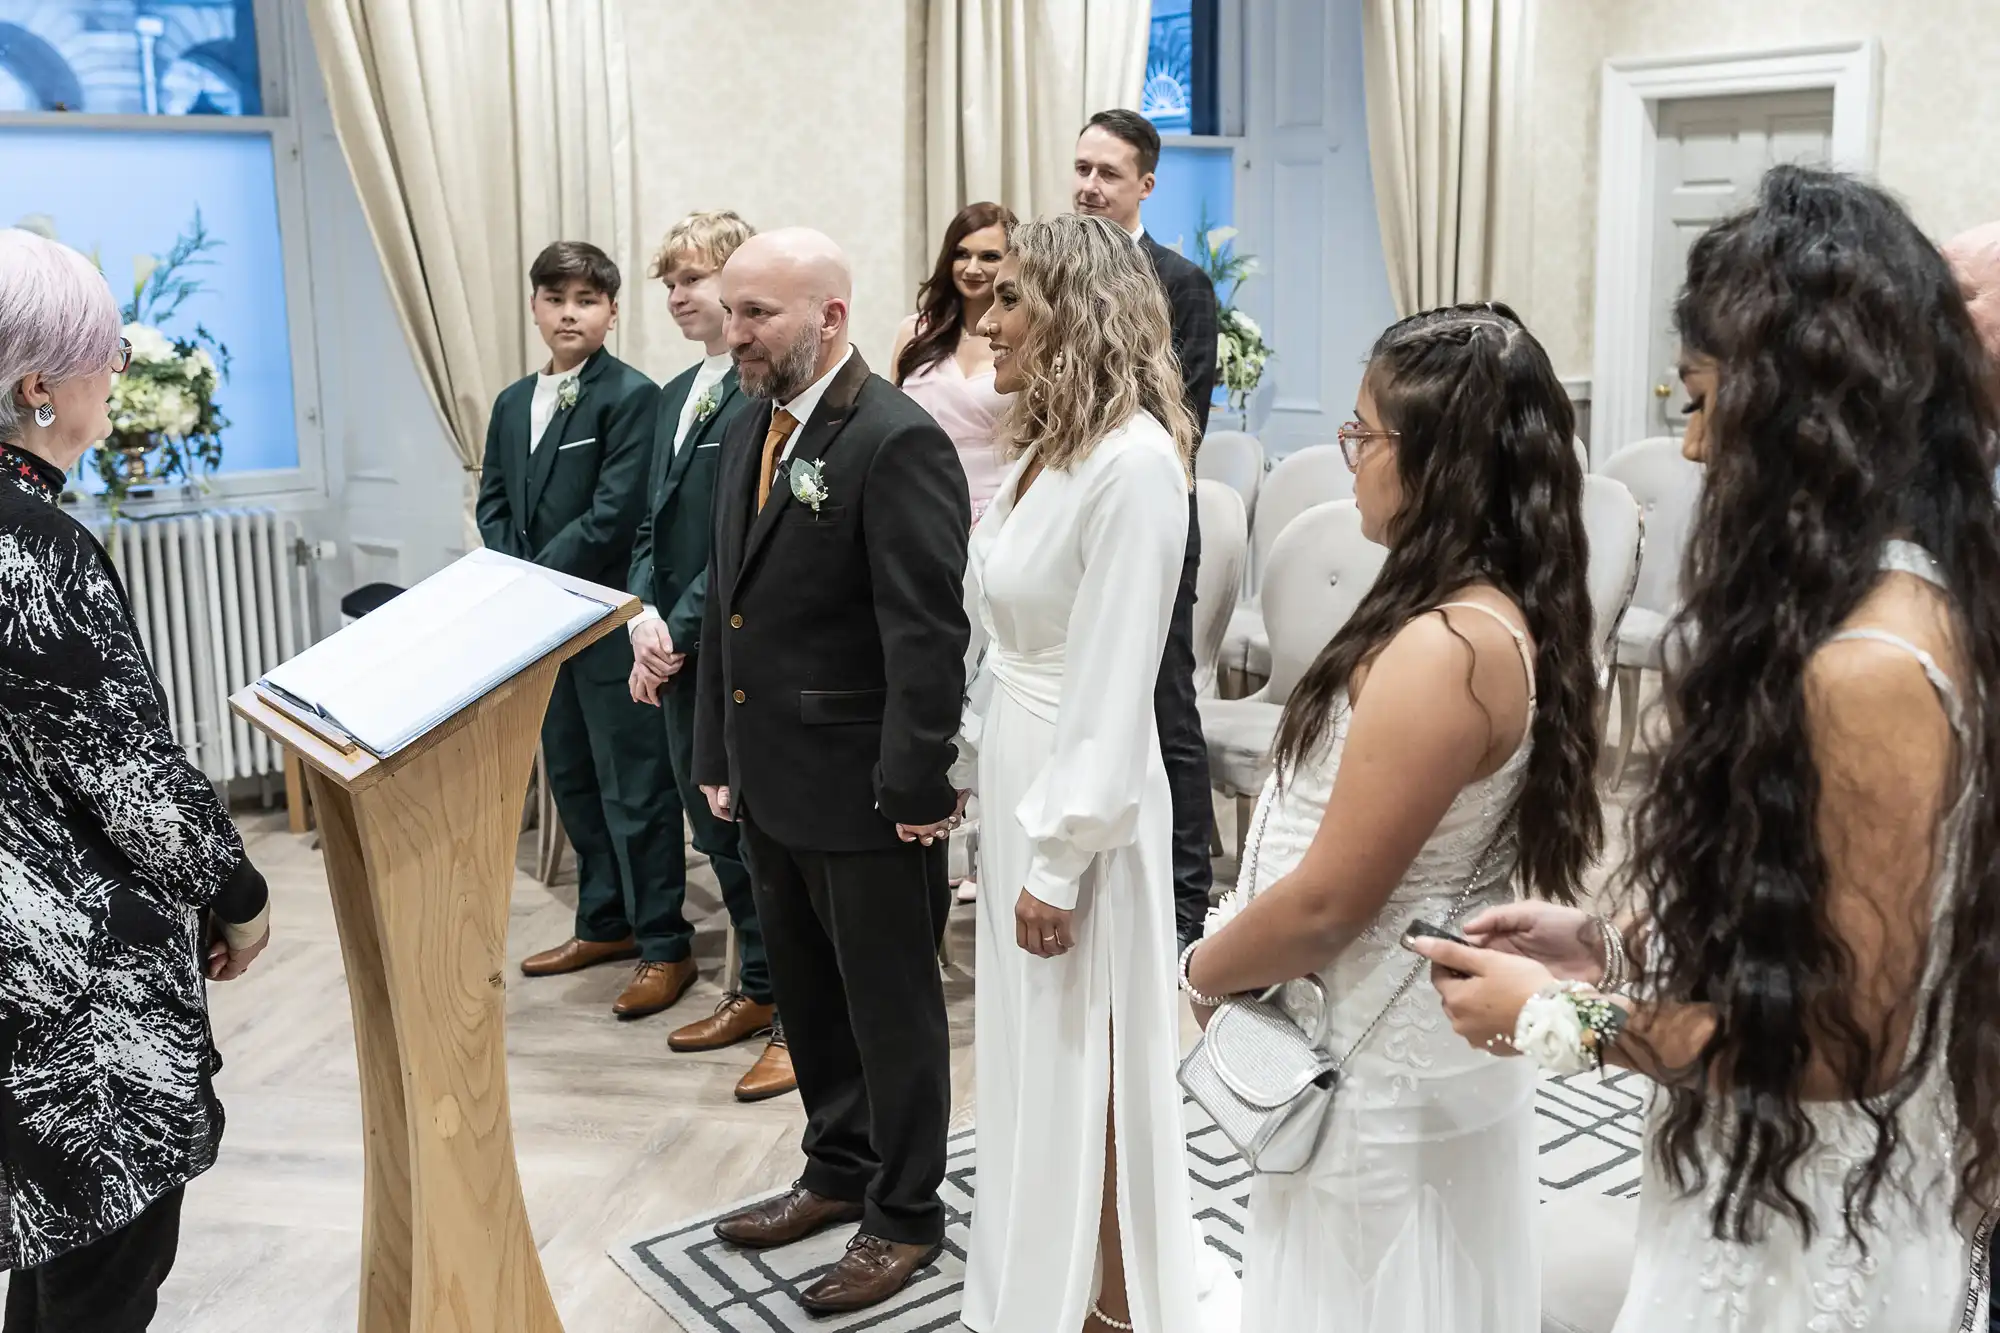 A wedding ceremony with a bride in a white dress and a groom in a black suit, standing with others, facing an officiant at a podium in a small indoor venue.